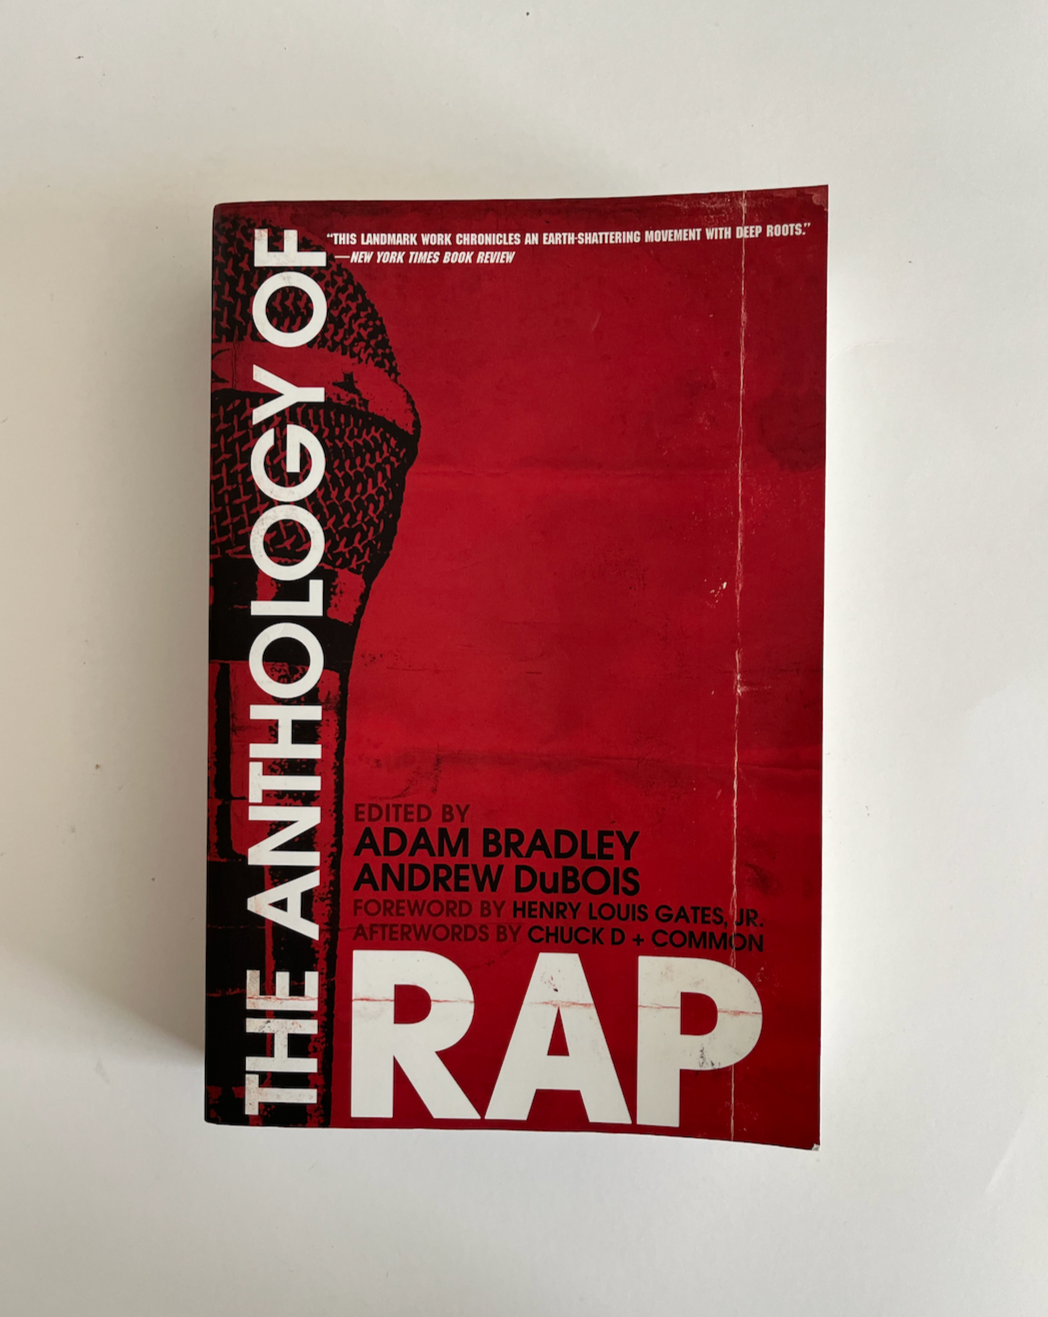 The Anthology of Rap edited by Adam Bradley and Andrew DuBois